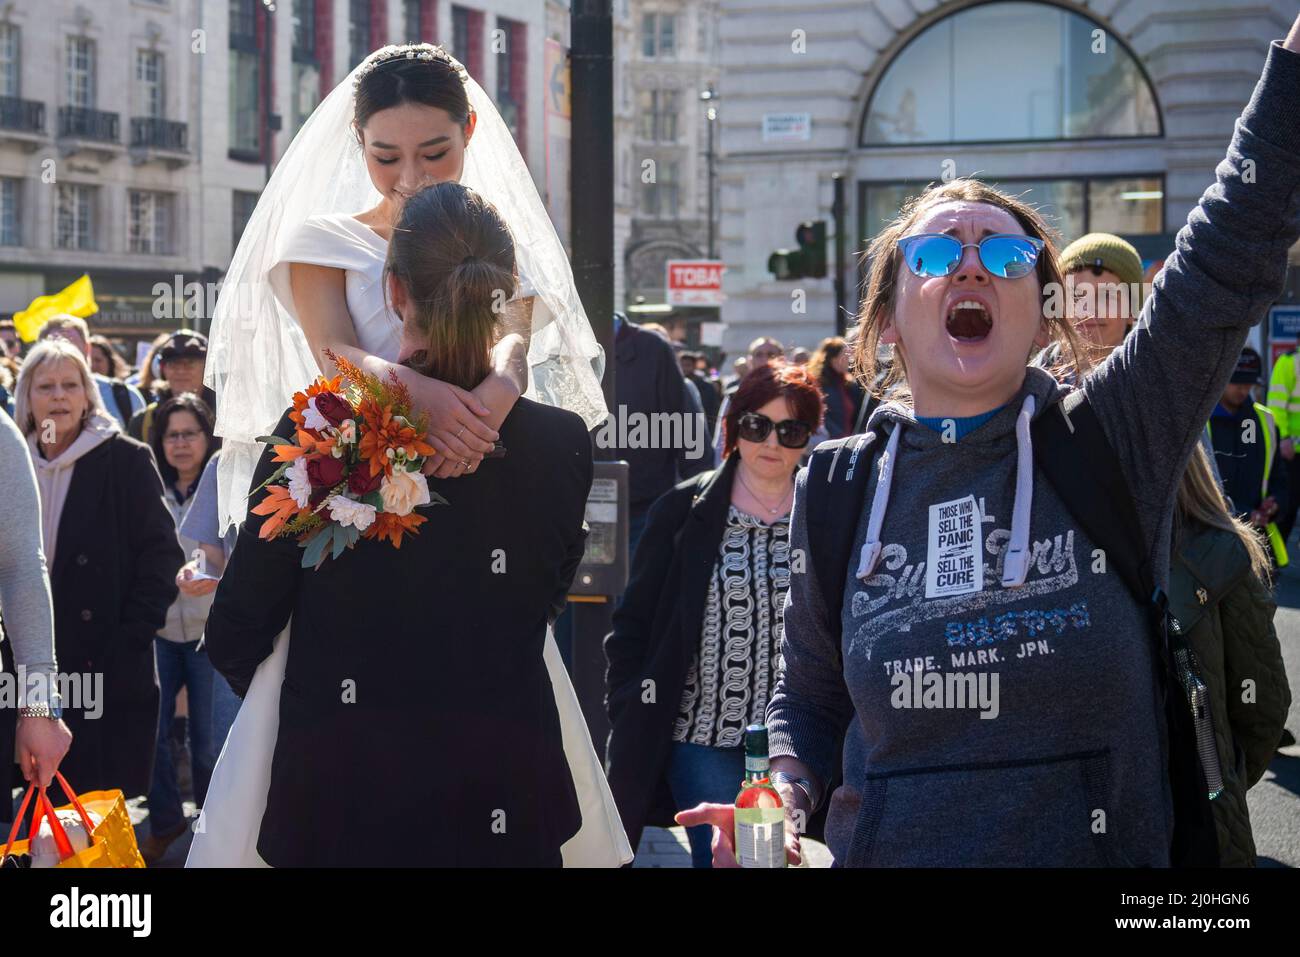 Westminster, London, UK. 19th Mar, 2022.A protest is taking place against vaccinating children for Covid 19, joined by anti-vaxxers. The march interrupted a wedding dress photoshoot with the Asian bride and white groom continuing regardless. Female chanting Stock Photo